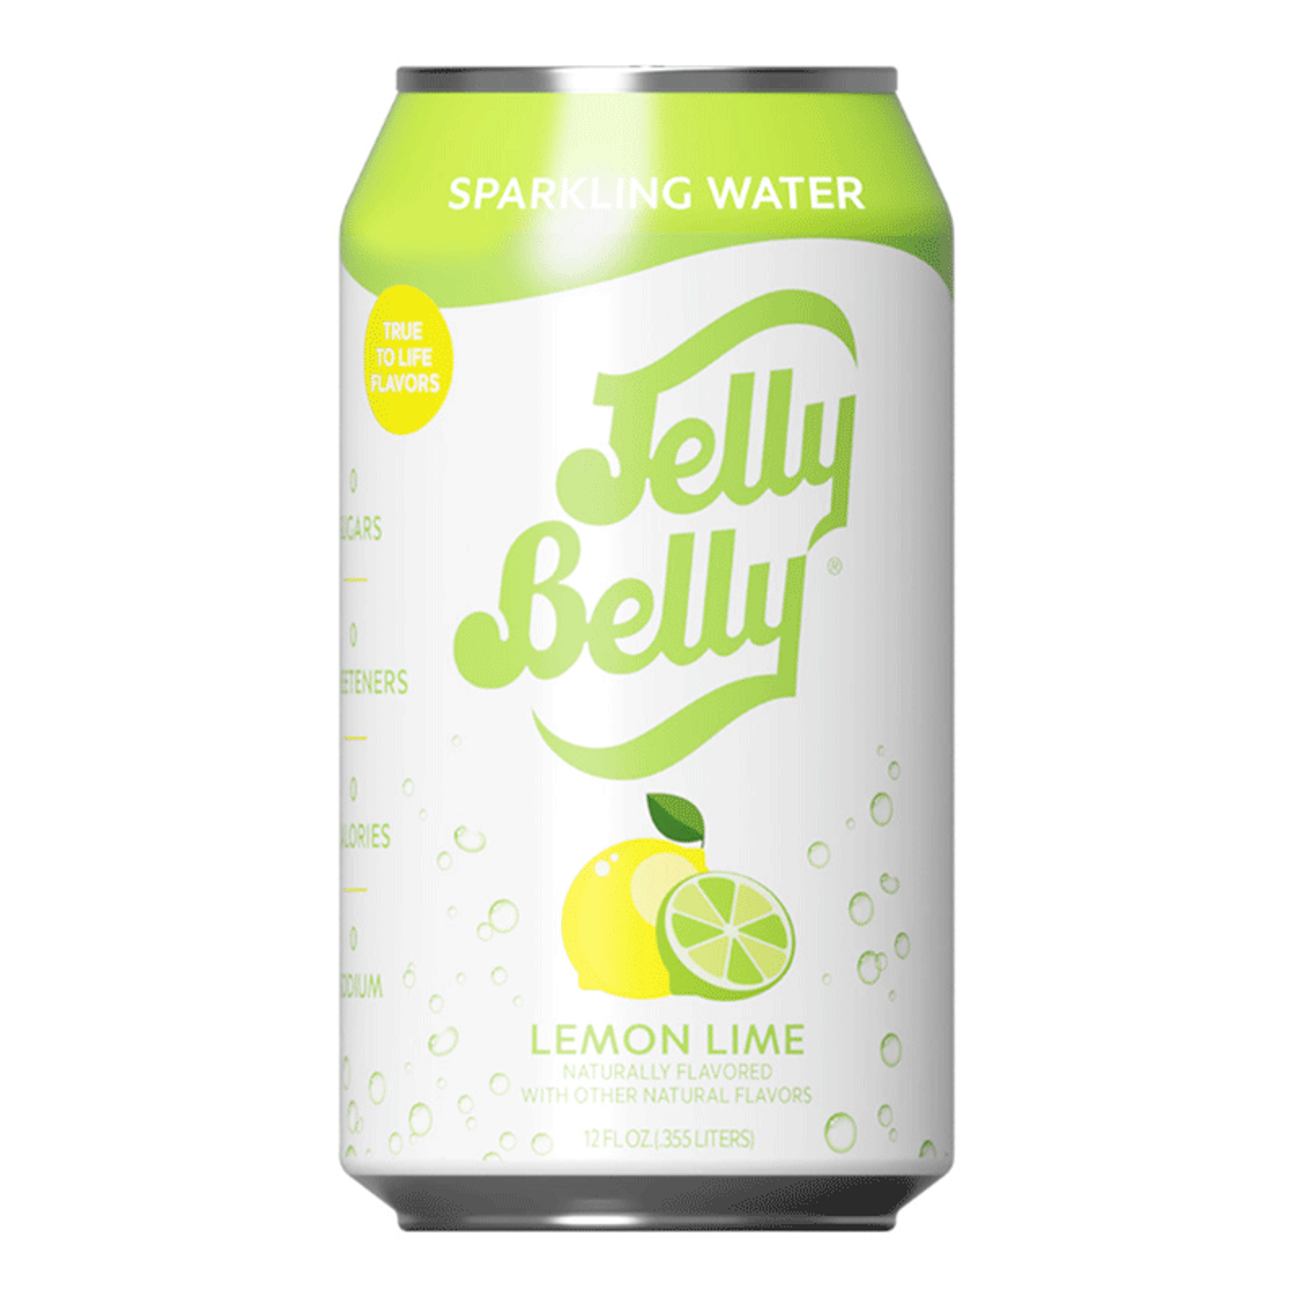 jelly-belly-lemon-lime-sparkling-water-76485-1